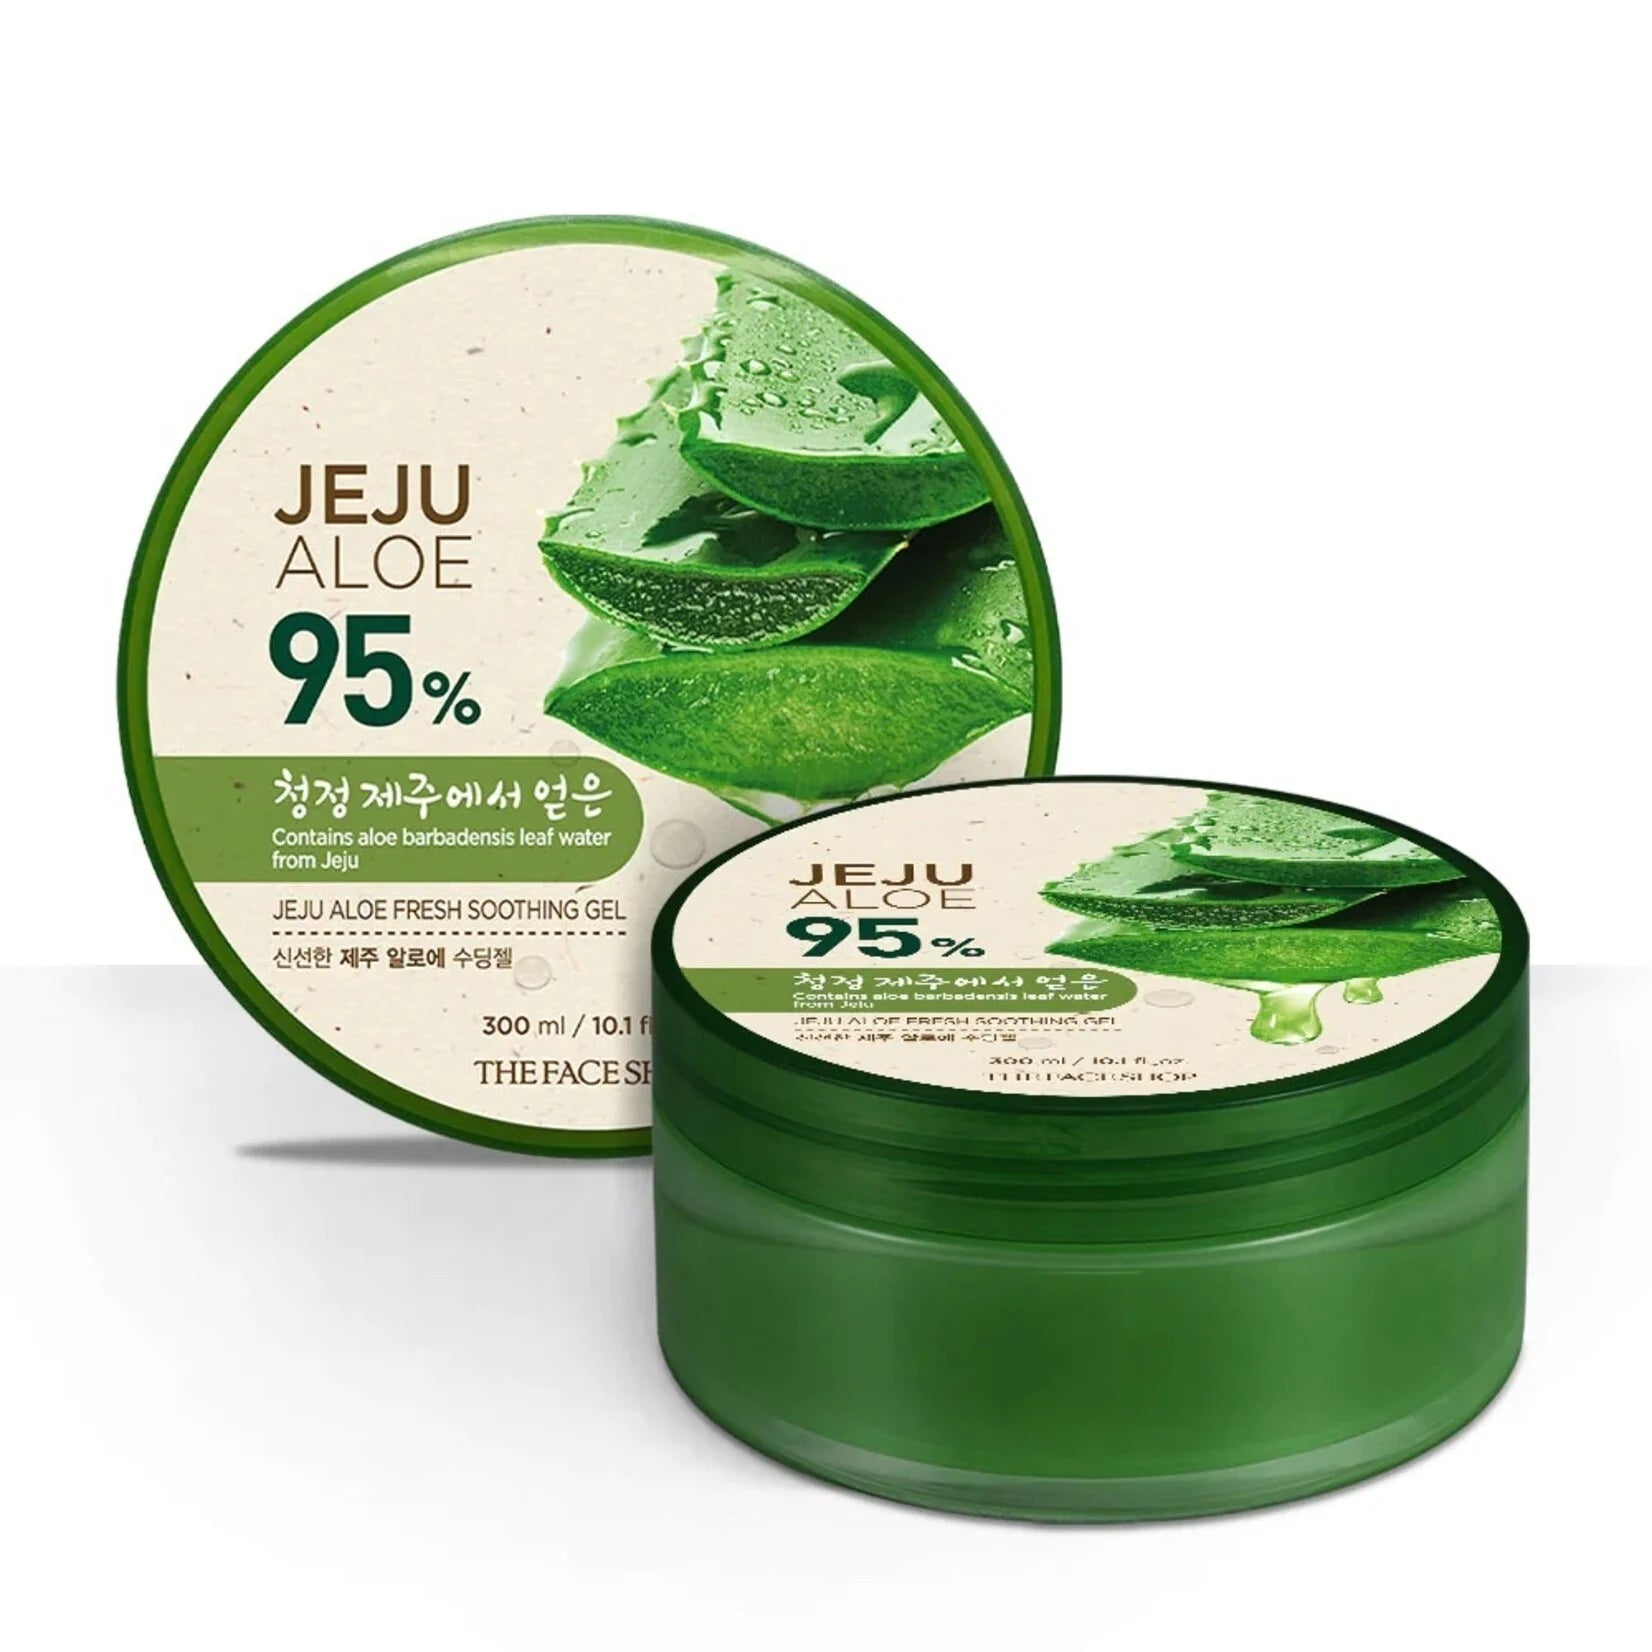 The Face Shop Jeju Aloe Fresh Soothing Gel 95%